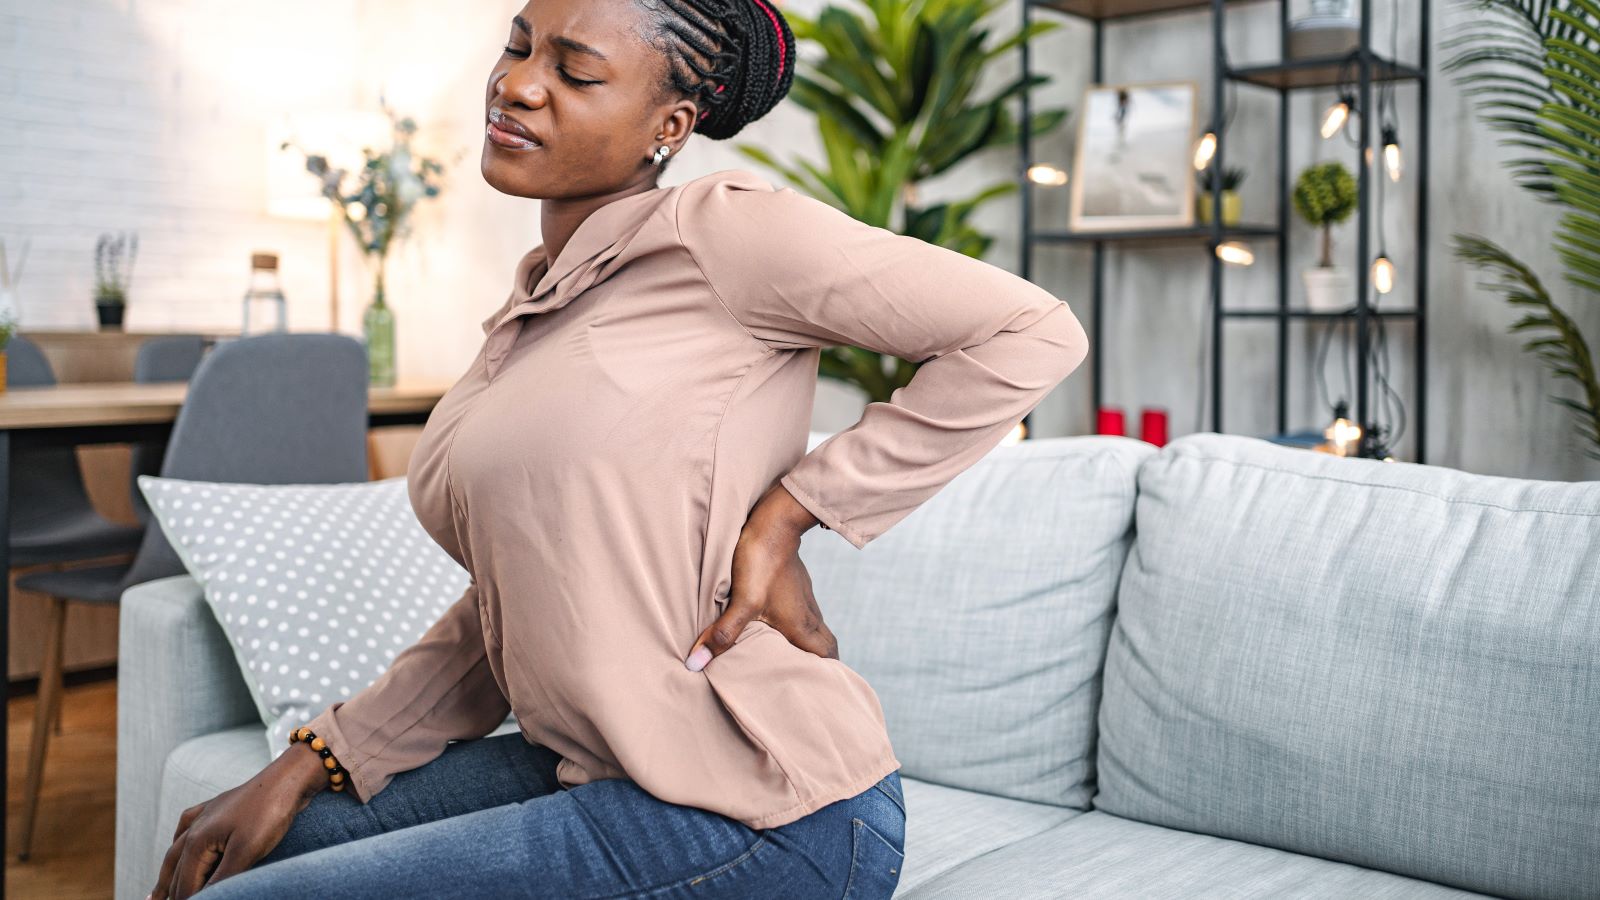 How do you know when it's time to see a doctor for your back pain? We asked an expert for the four surefire signs.